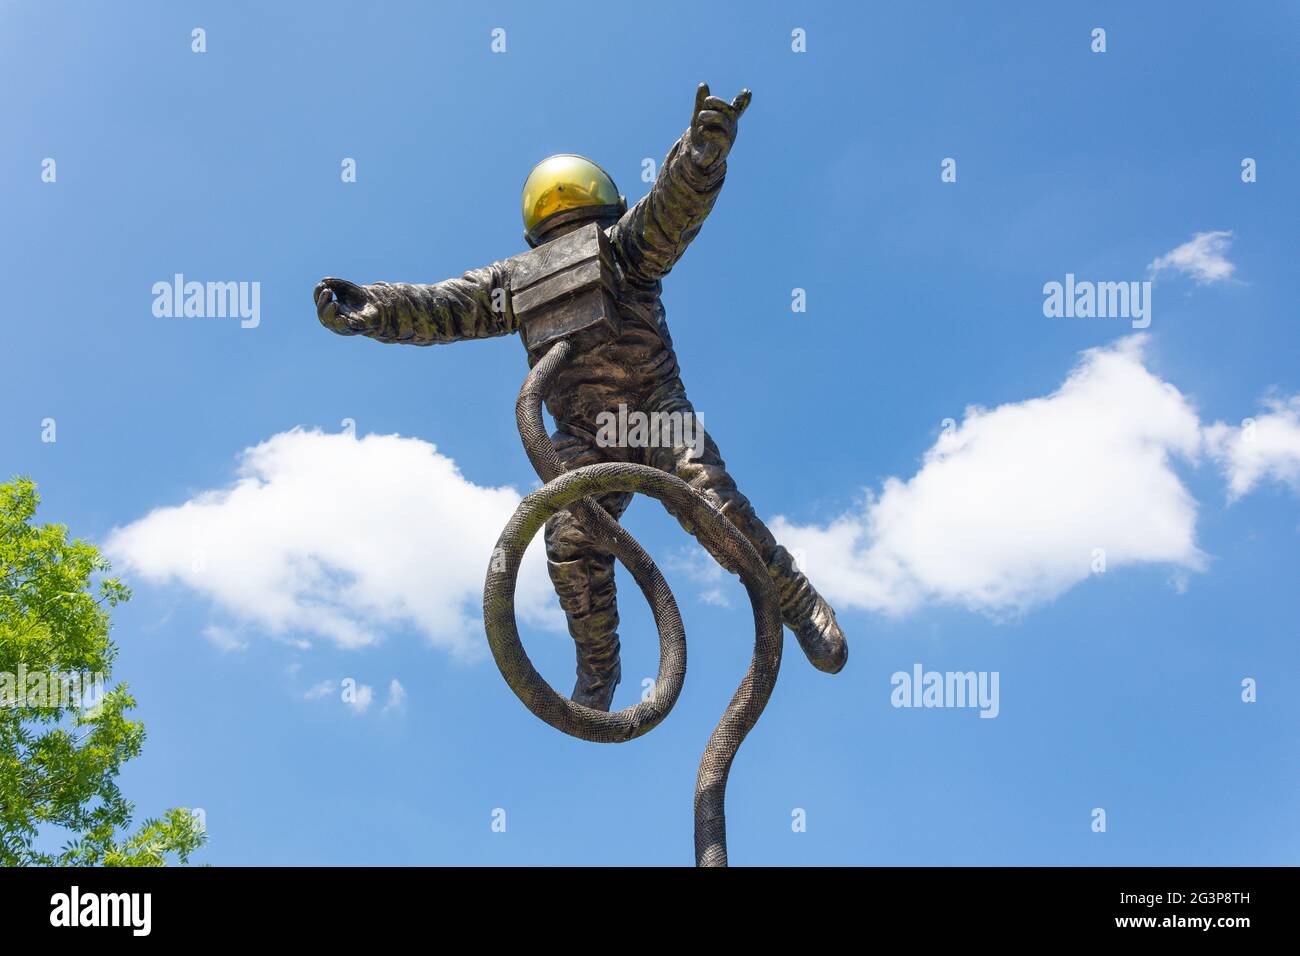 The Pioneer Statue outside The National Space Centre, Exploration Drive, Belgrave, Leicester, Leicestershire, England, United Kingdom Stock Photo